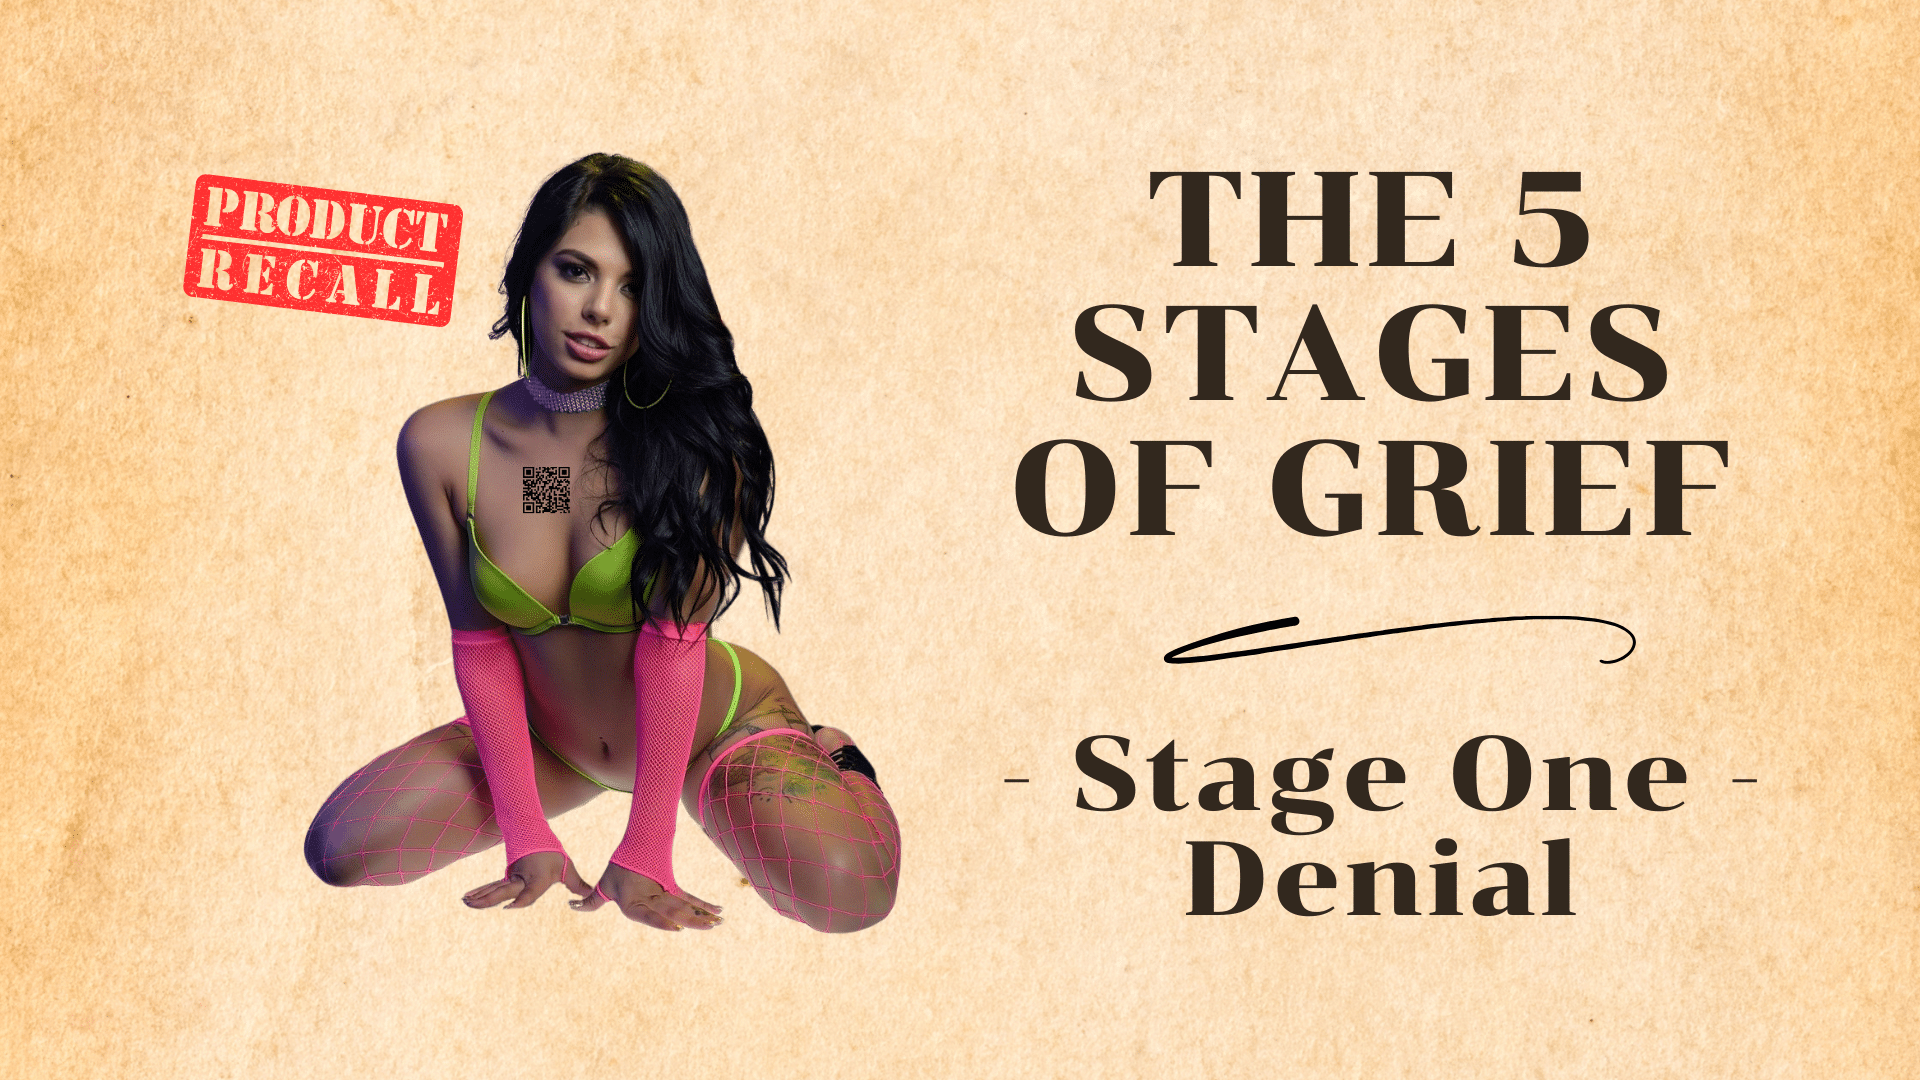 The 5 Stages of Grief - Stage 1 - Denial